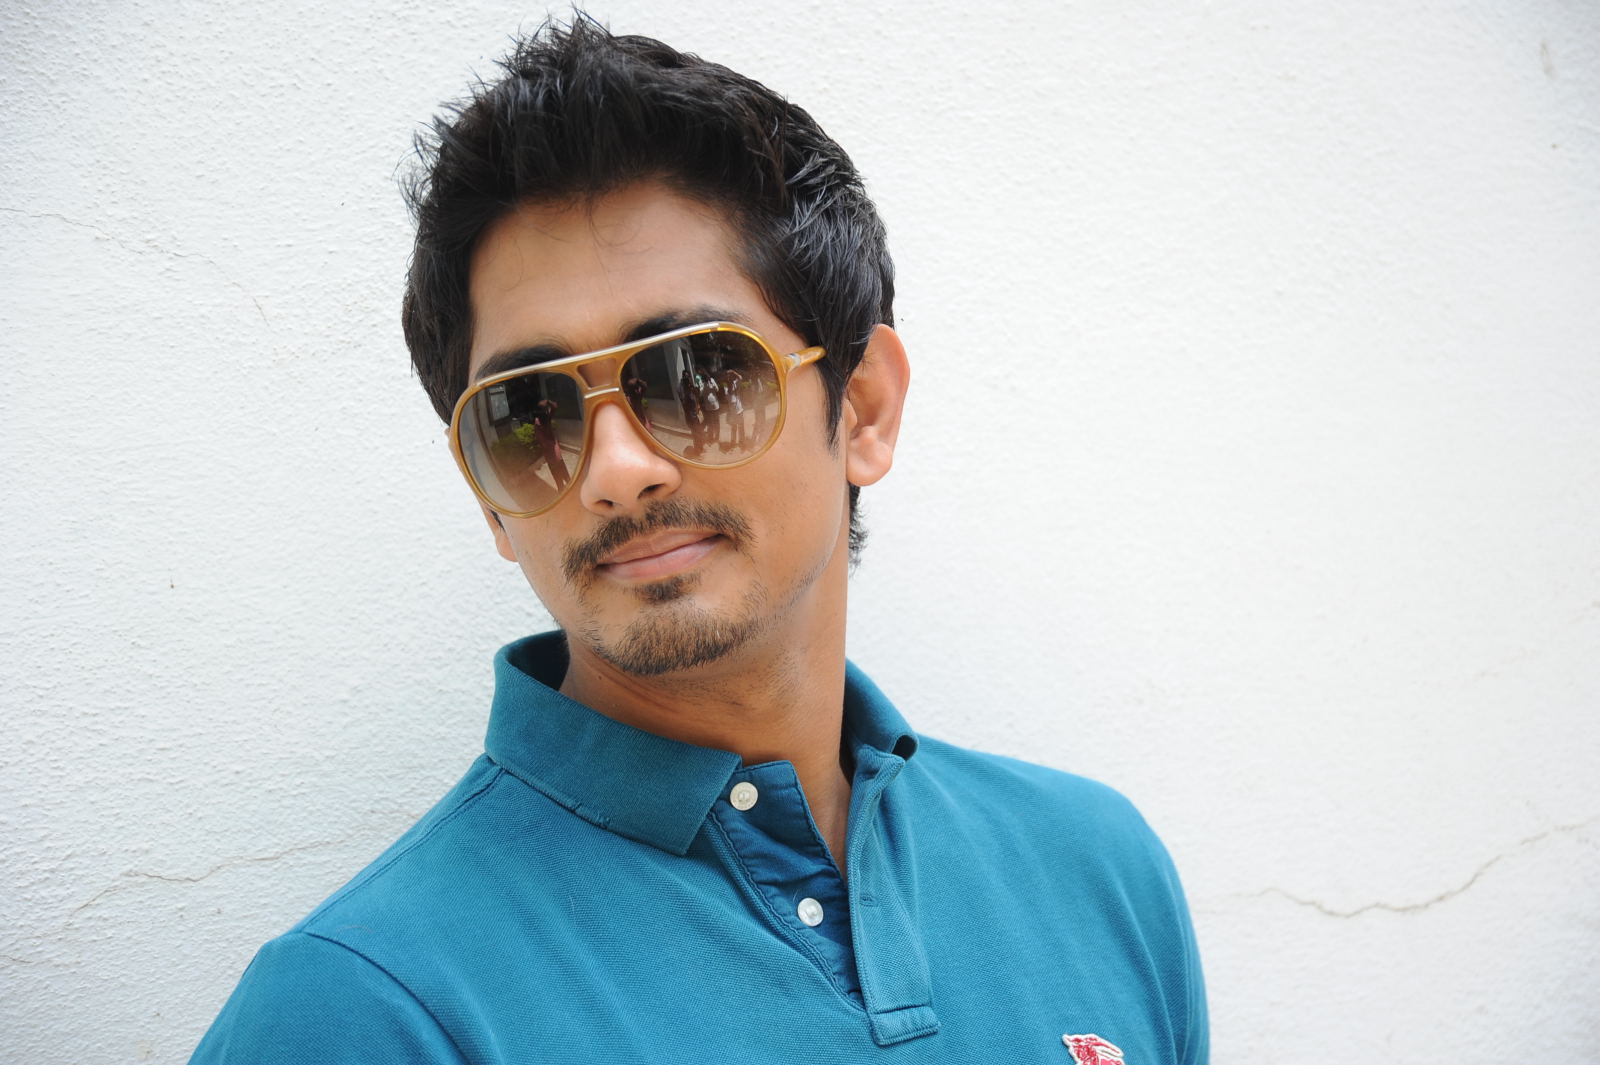 siddharth photos | Picture 41426